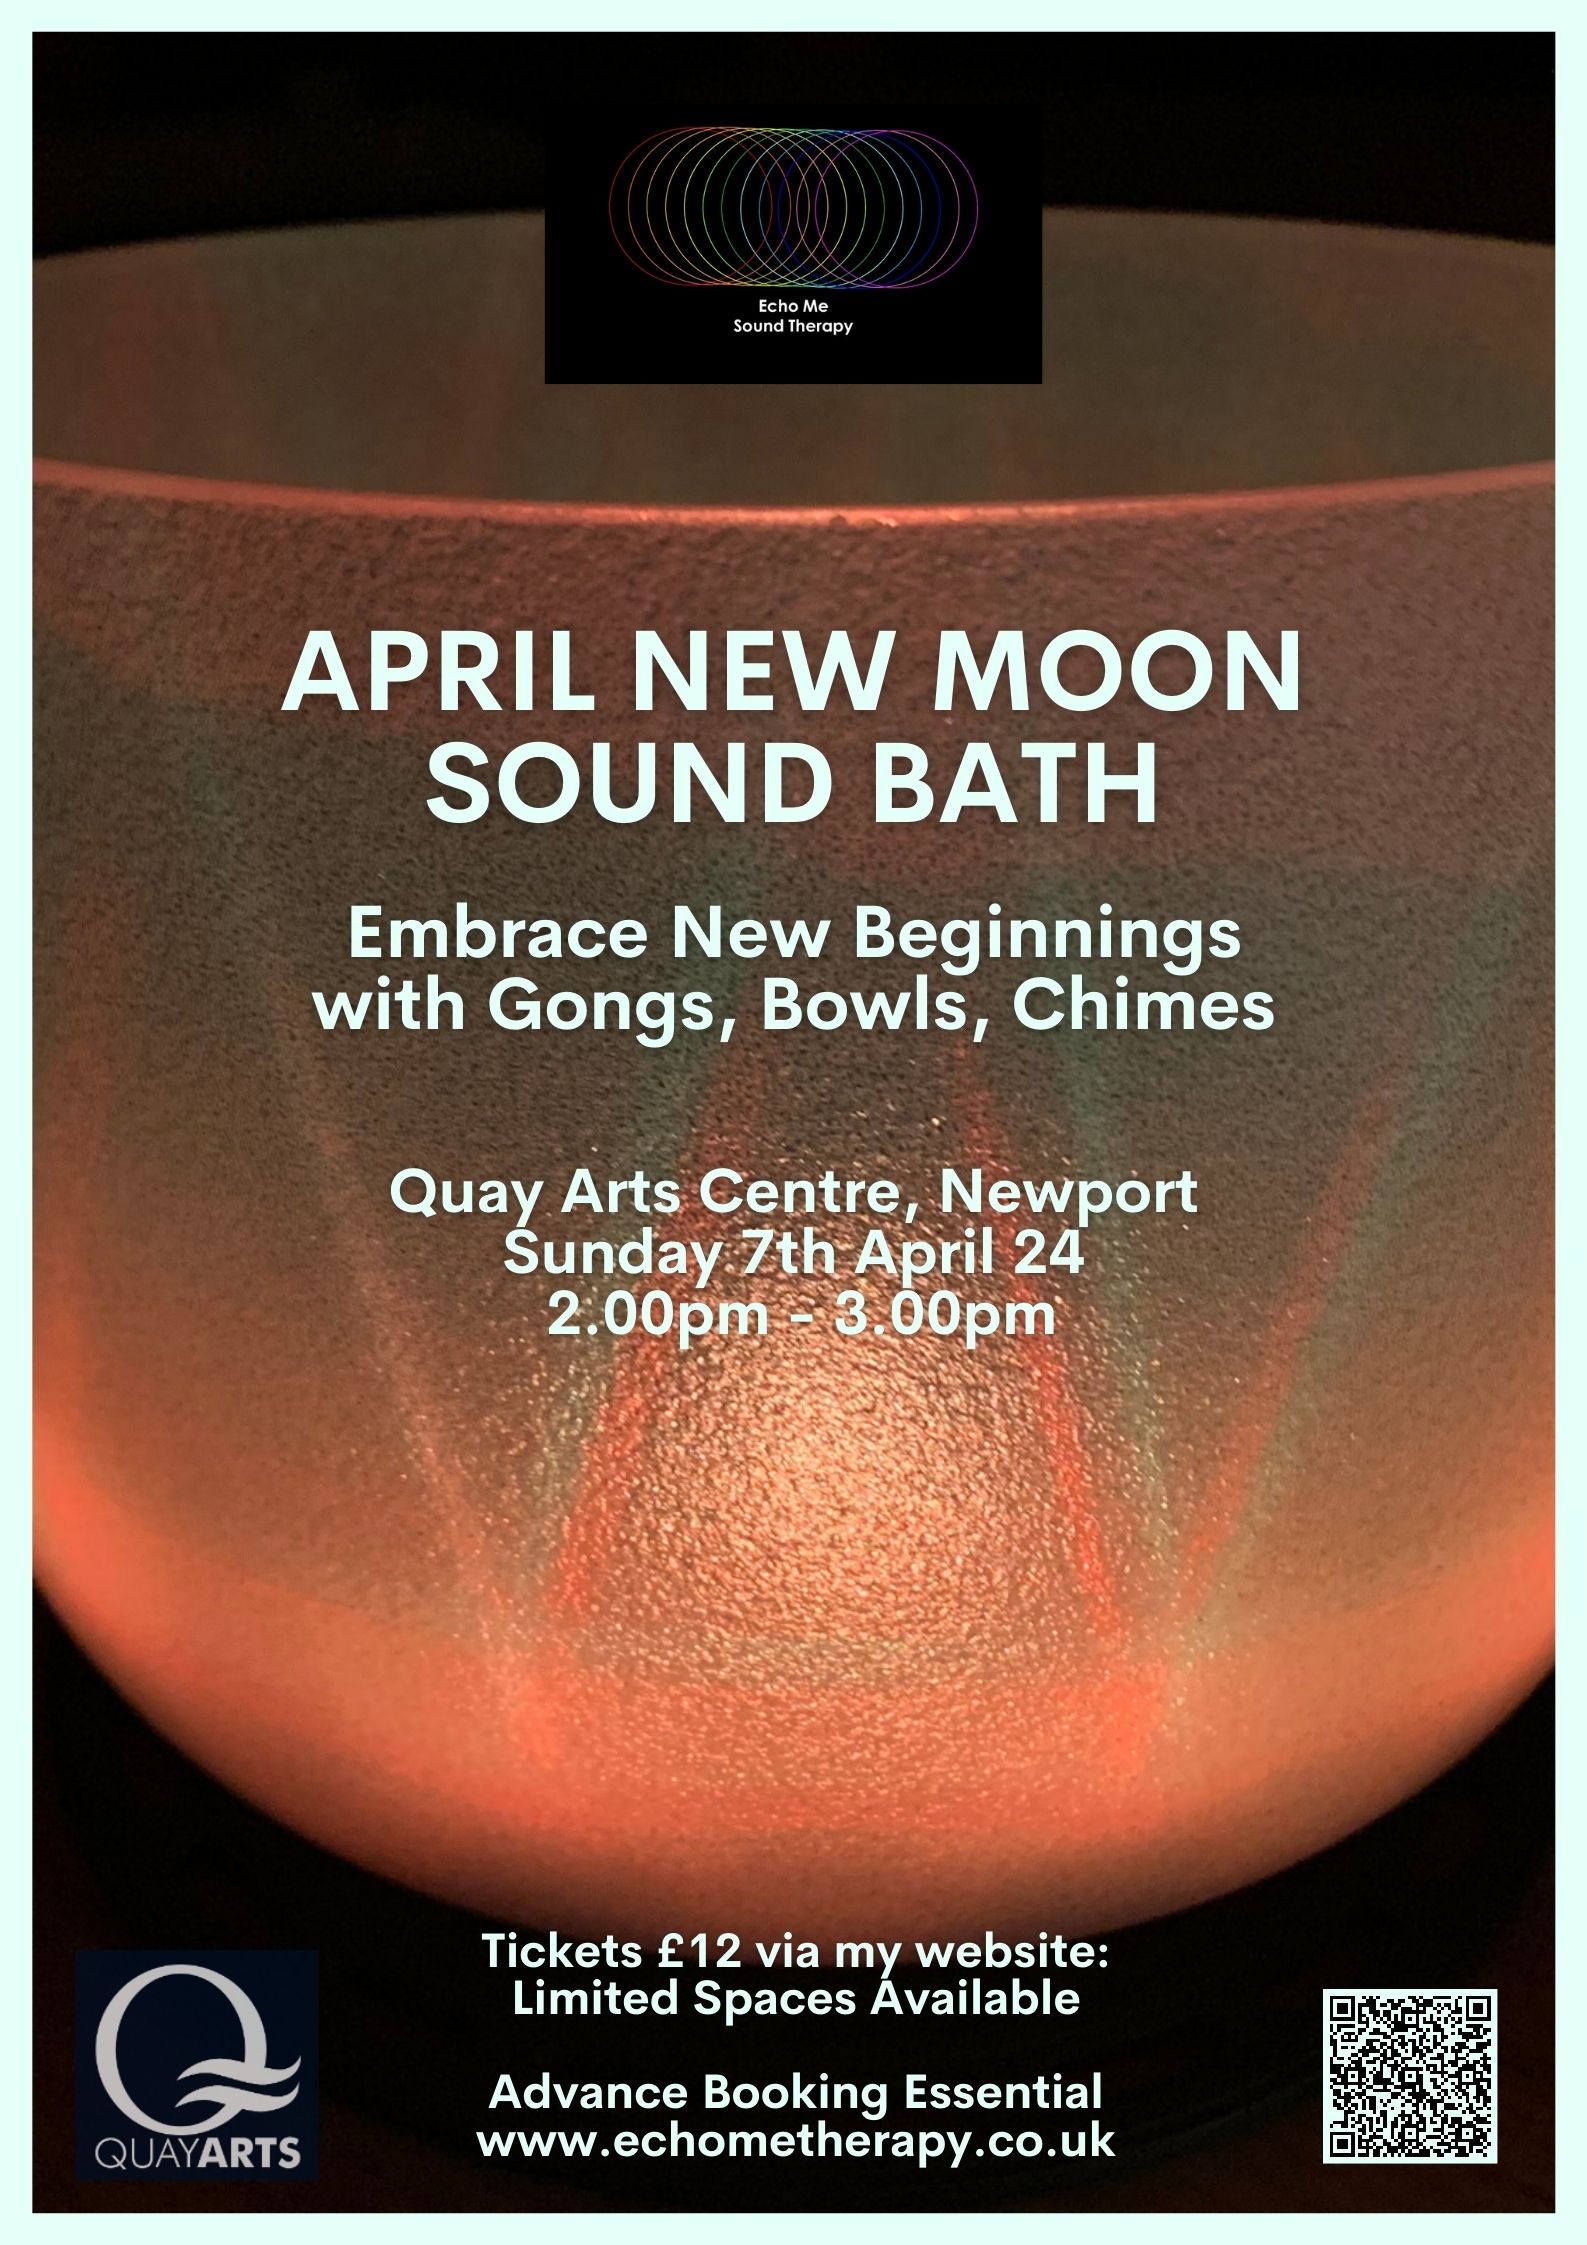 ISLE OF WIGHT - April New Moon Gong & Sound Bath, Isle of Wight - Quay Arts Cent